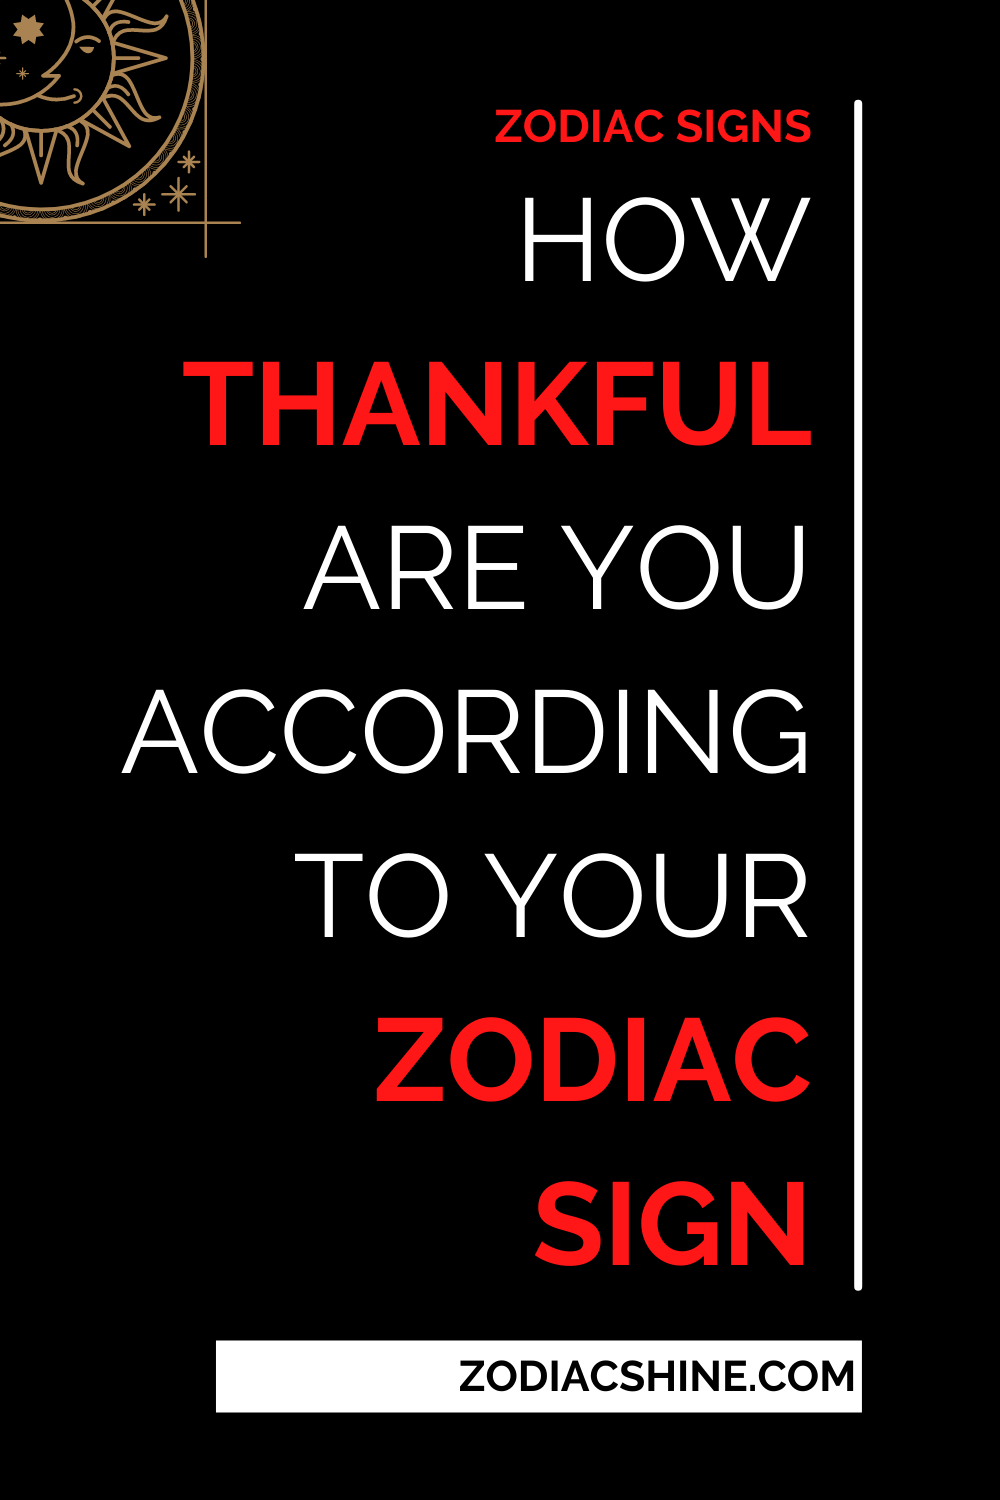 How Thankful Are You According To Your Zodiac Sign